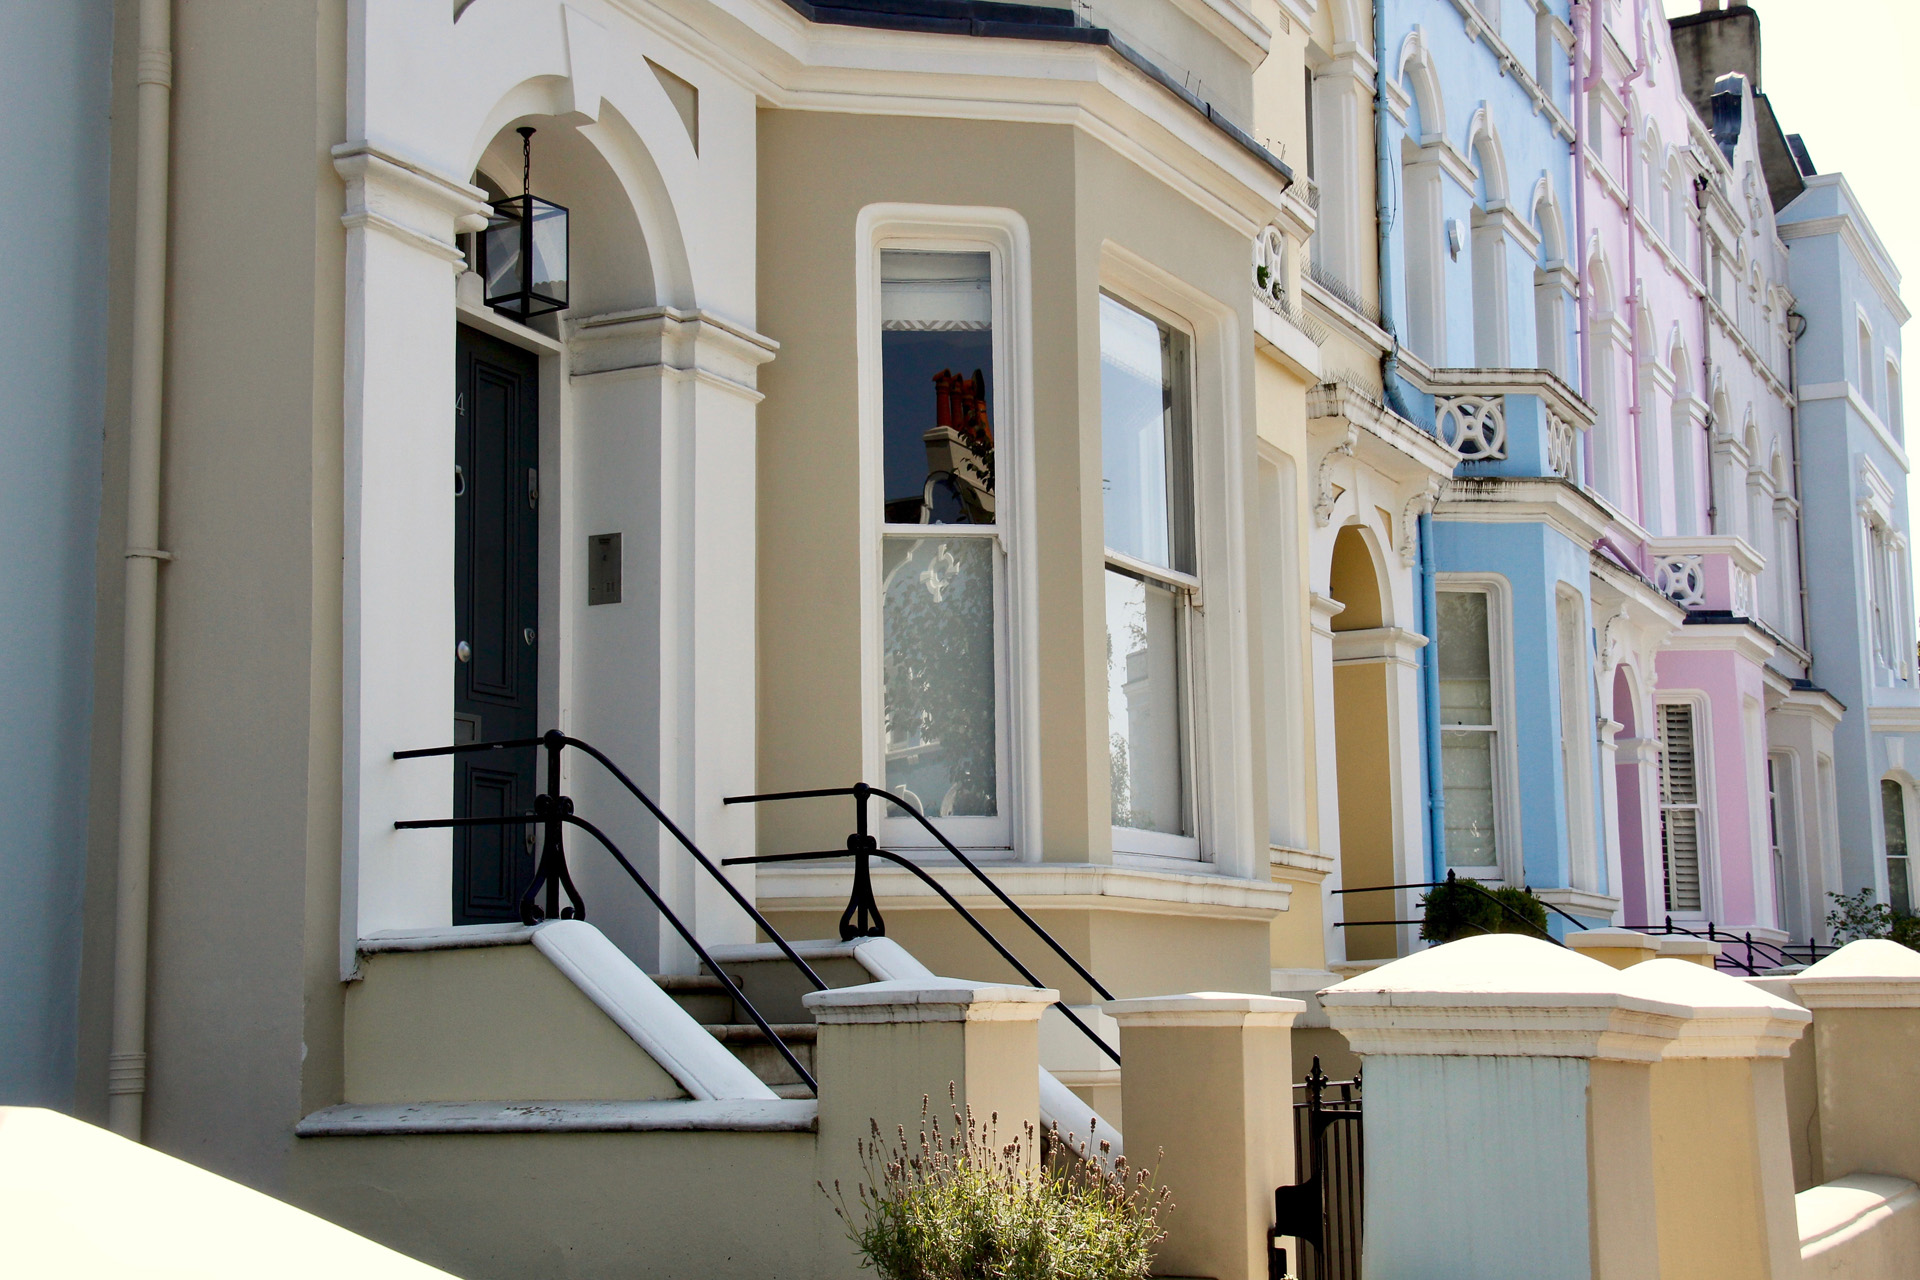 Aesthetic homes in Notting Hill, London